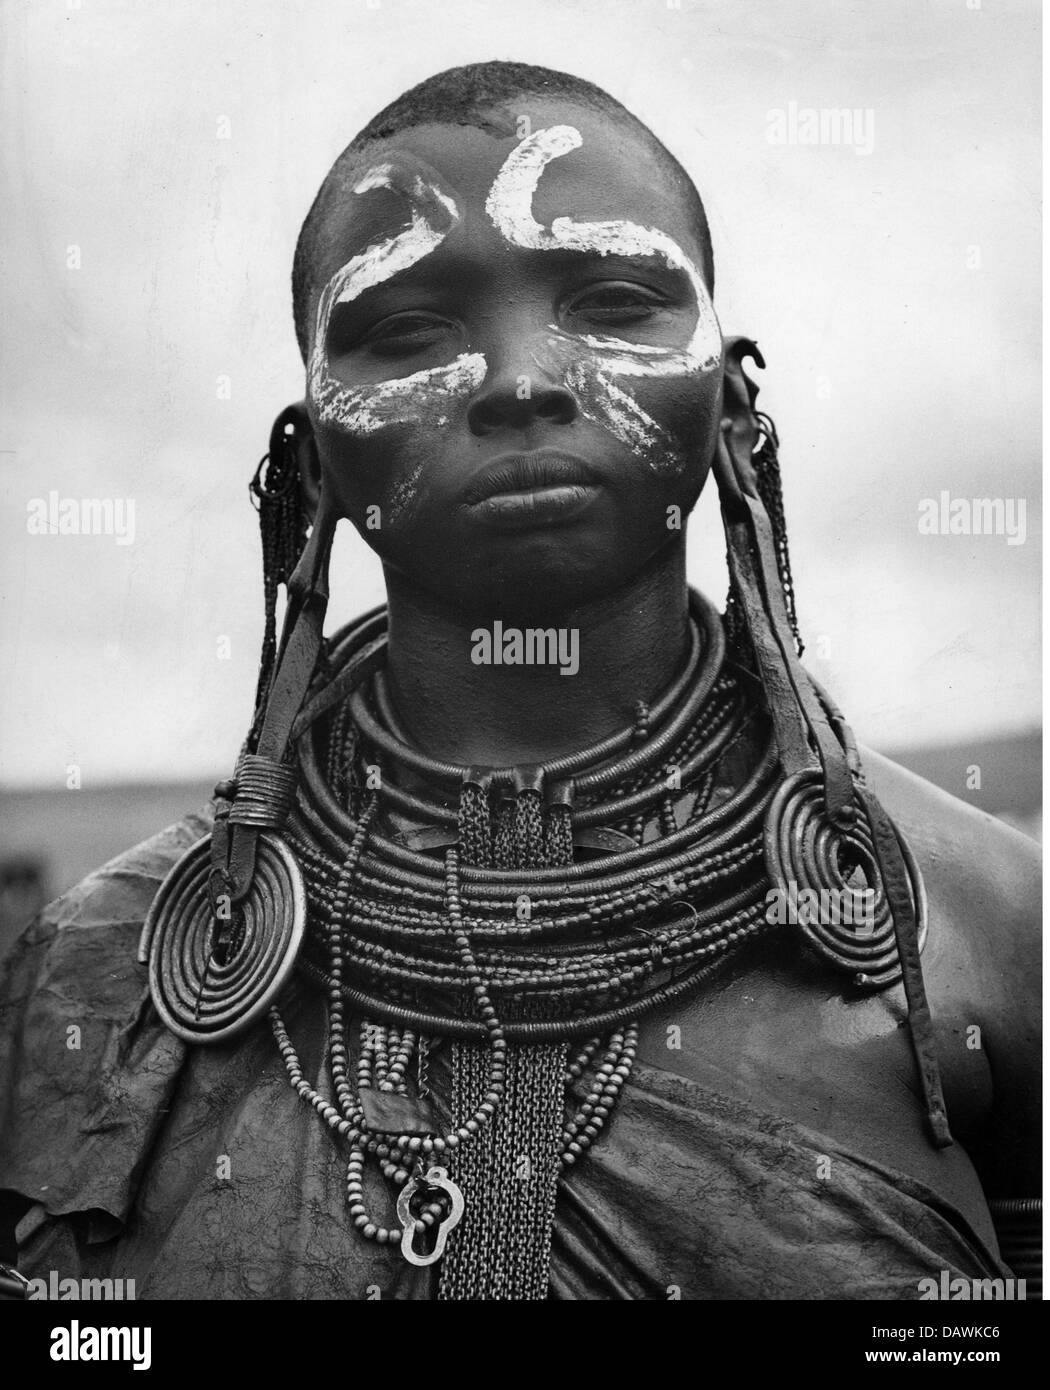 people, ethnic, women, African woman, portrait with body painting, 1960s, Additional-Rights-Clearences-Not Available Stock Photo